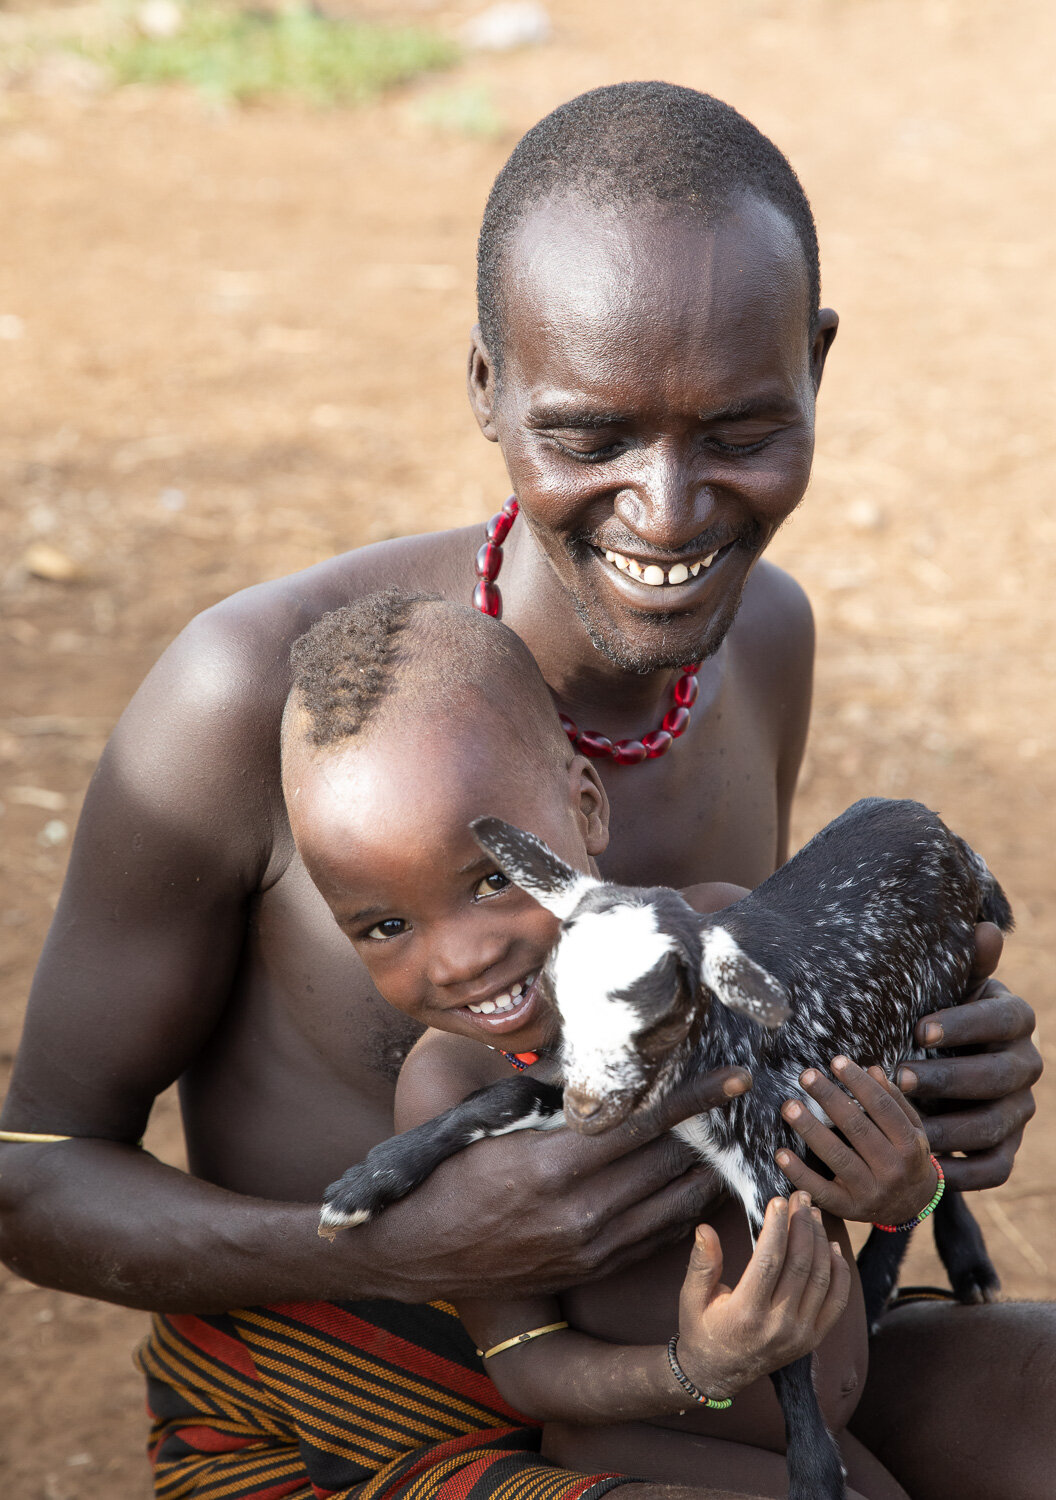 Dassanech man and child from Omo Valley tribe tour